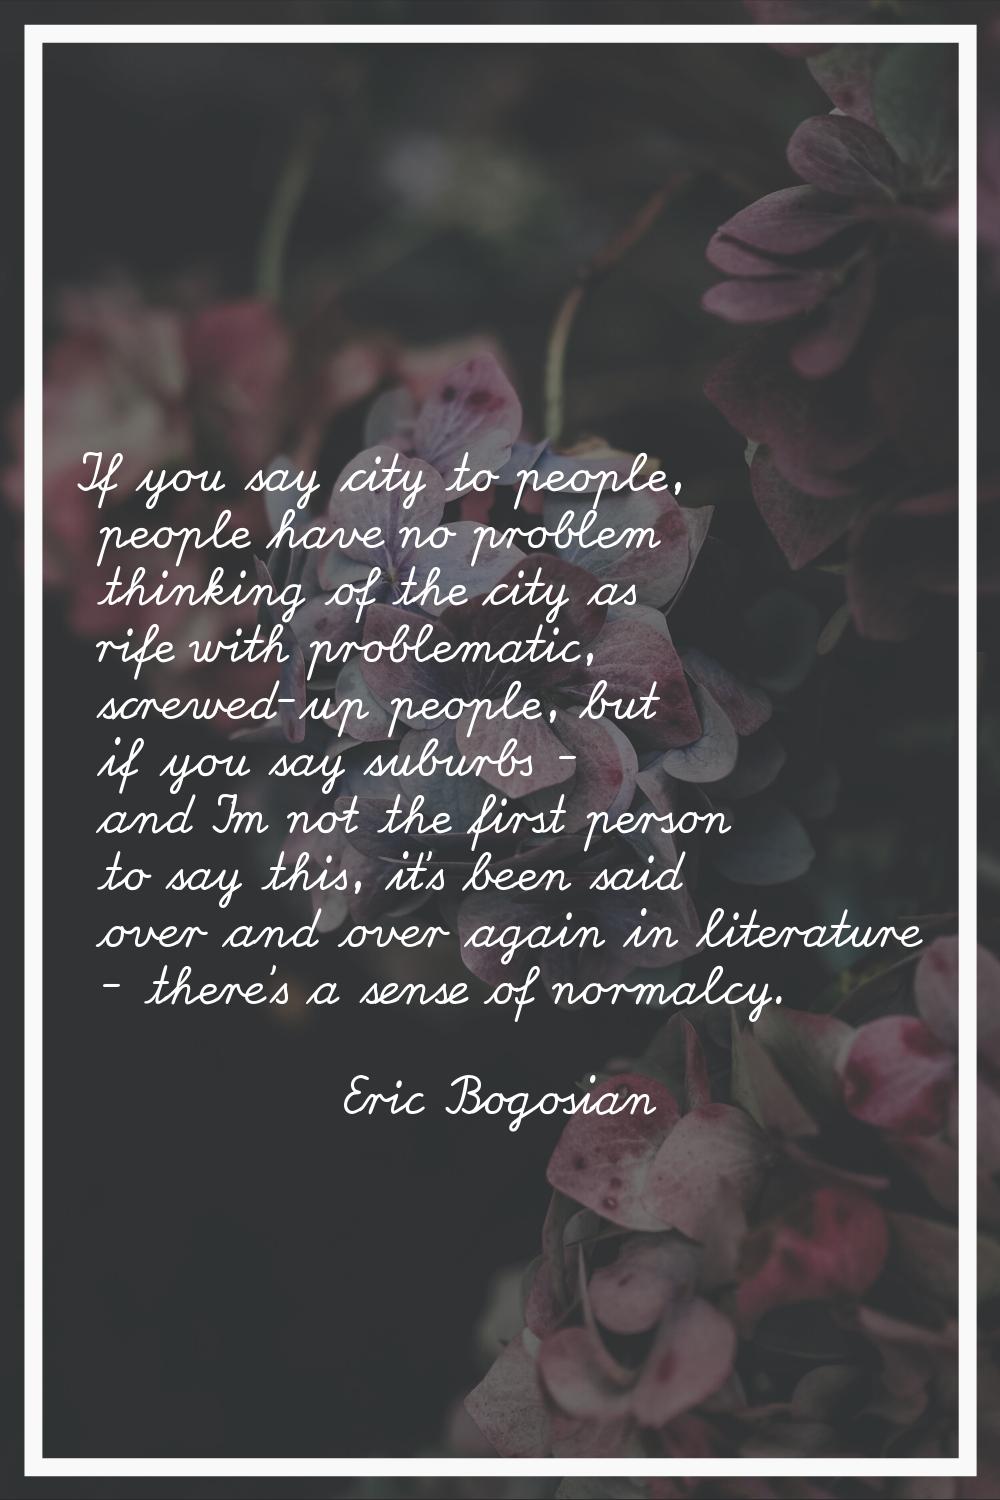 If you say city to people, people have no problem thinking of the city as rife with problematic, sc